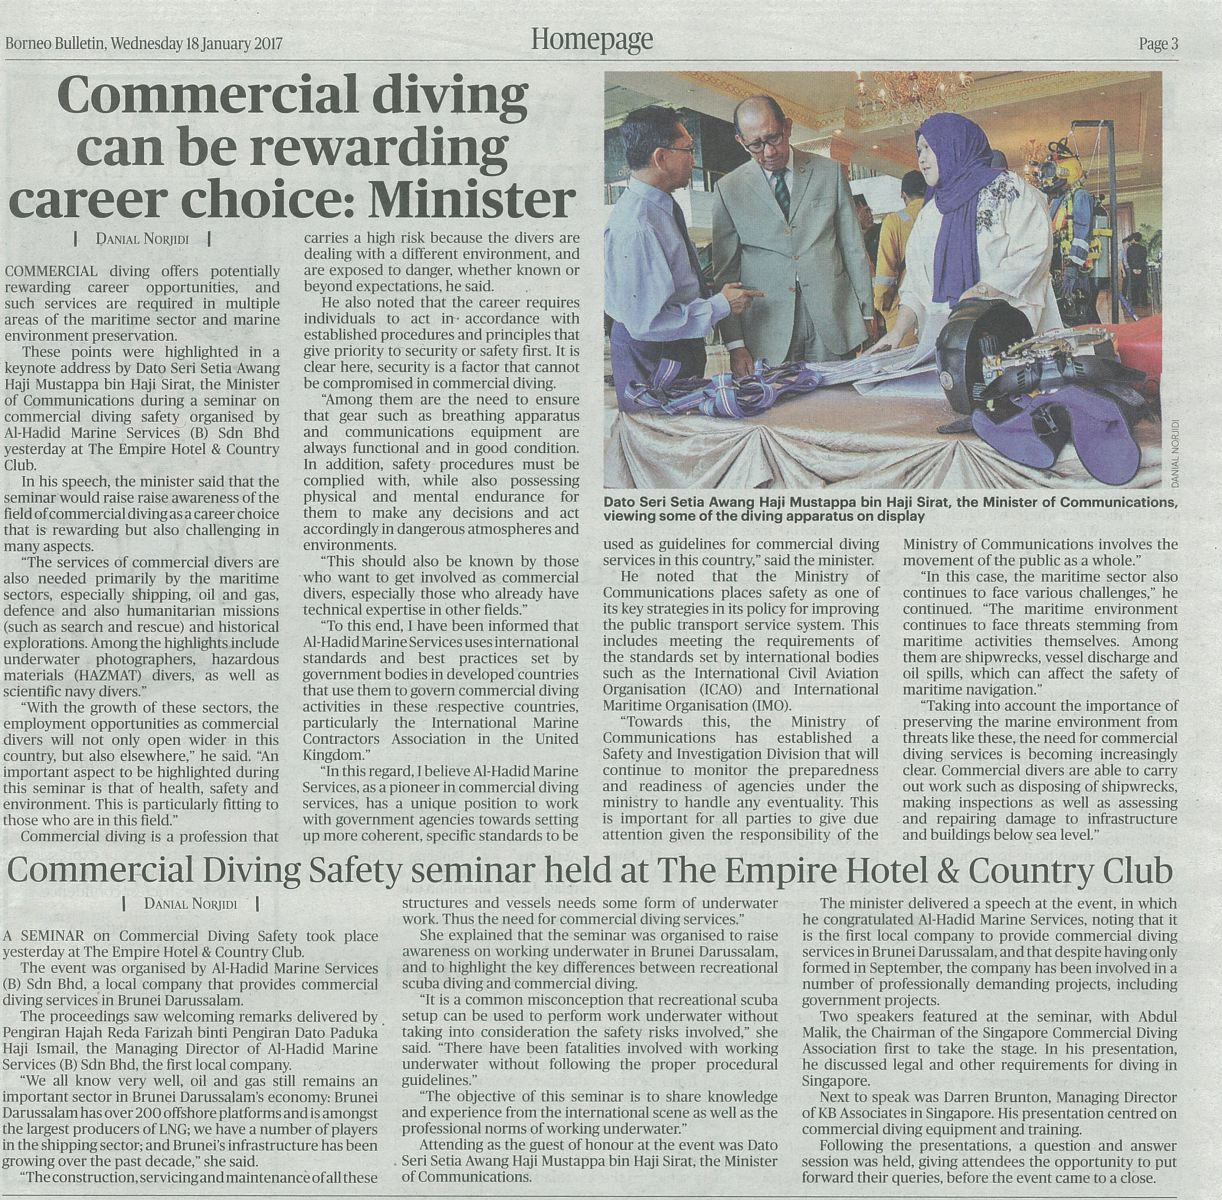 Commercial Diving can be rewarding career choice: Minister